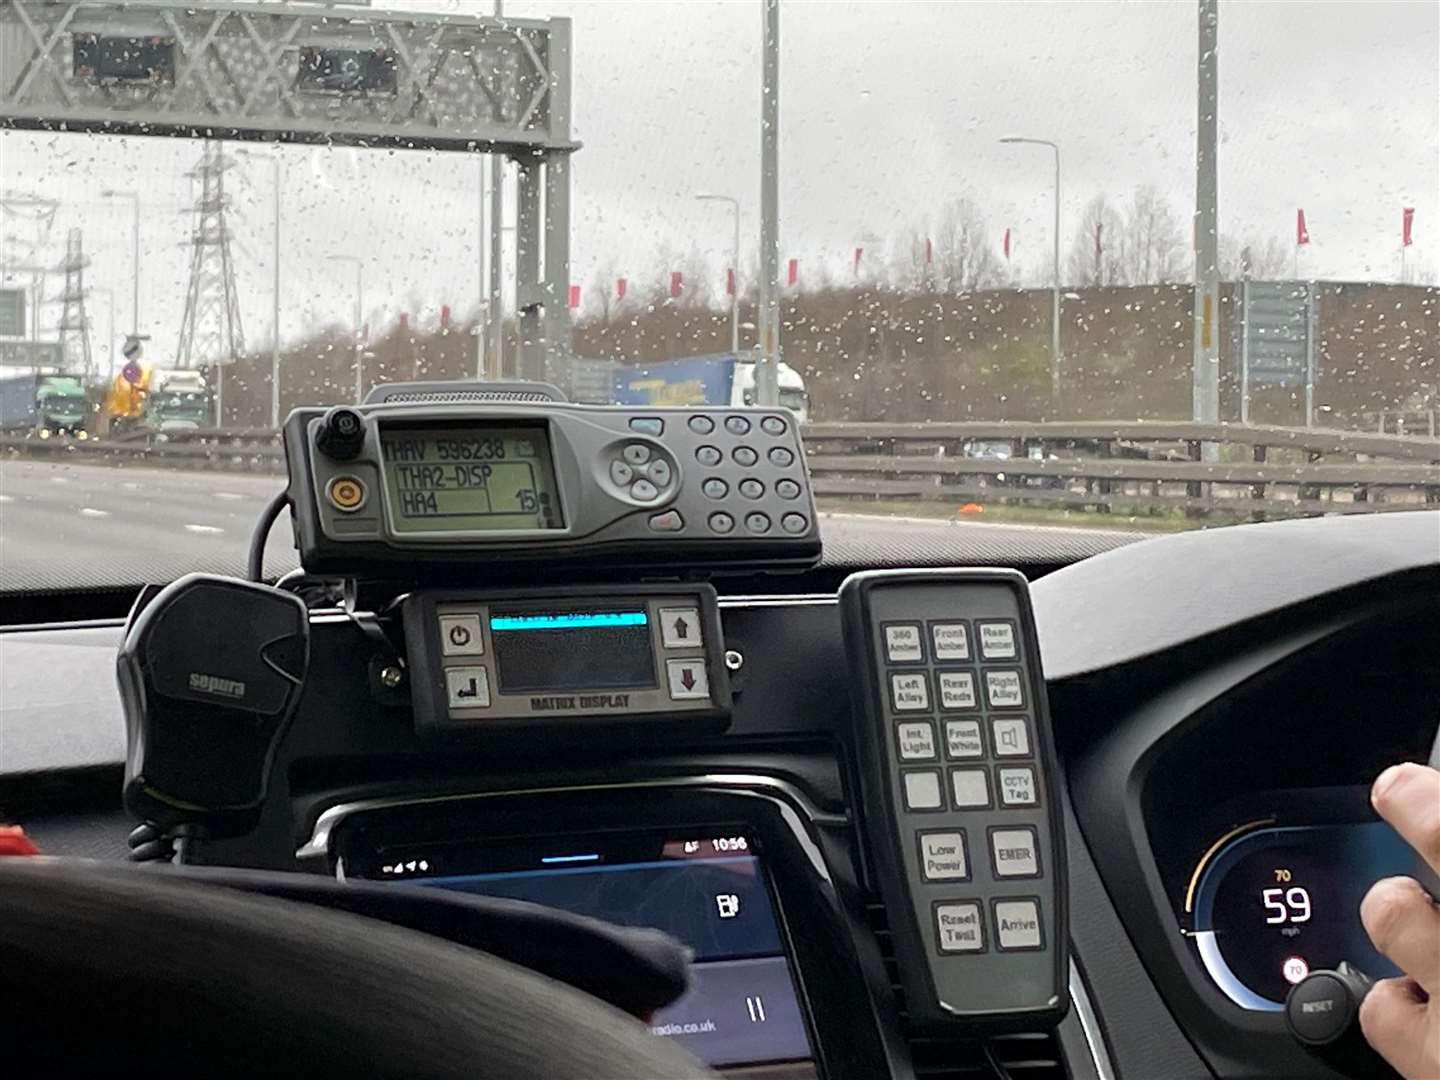 The equipment inside a traffic officer vehicle to help slow and control traffic